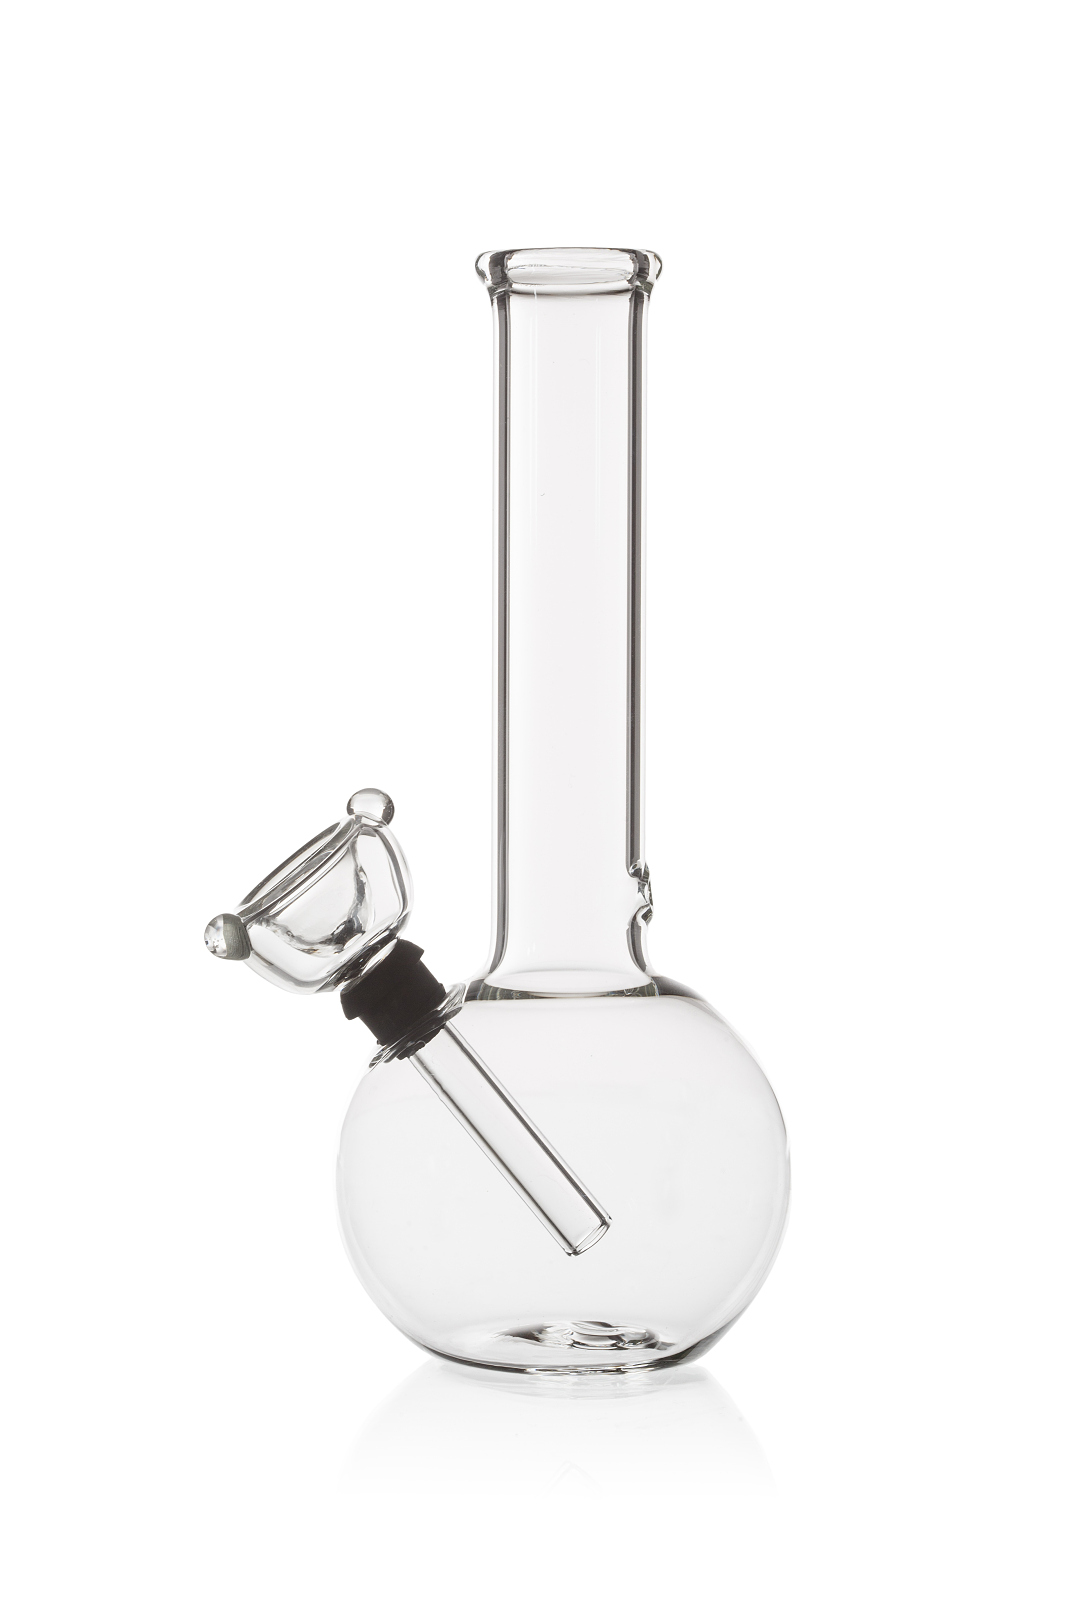 Black Mobile Water Bong Pipe & Water Glass Bong Pipes 